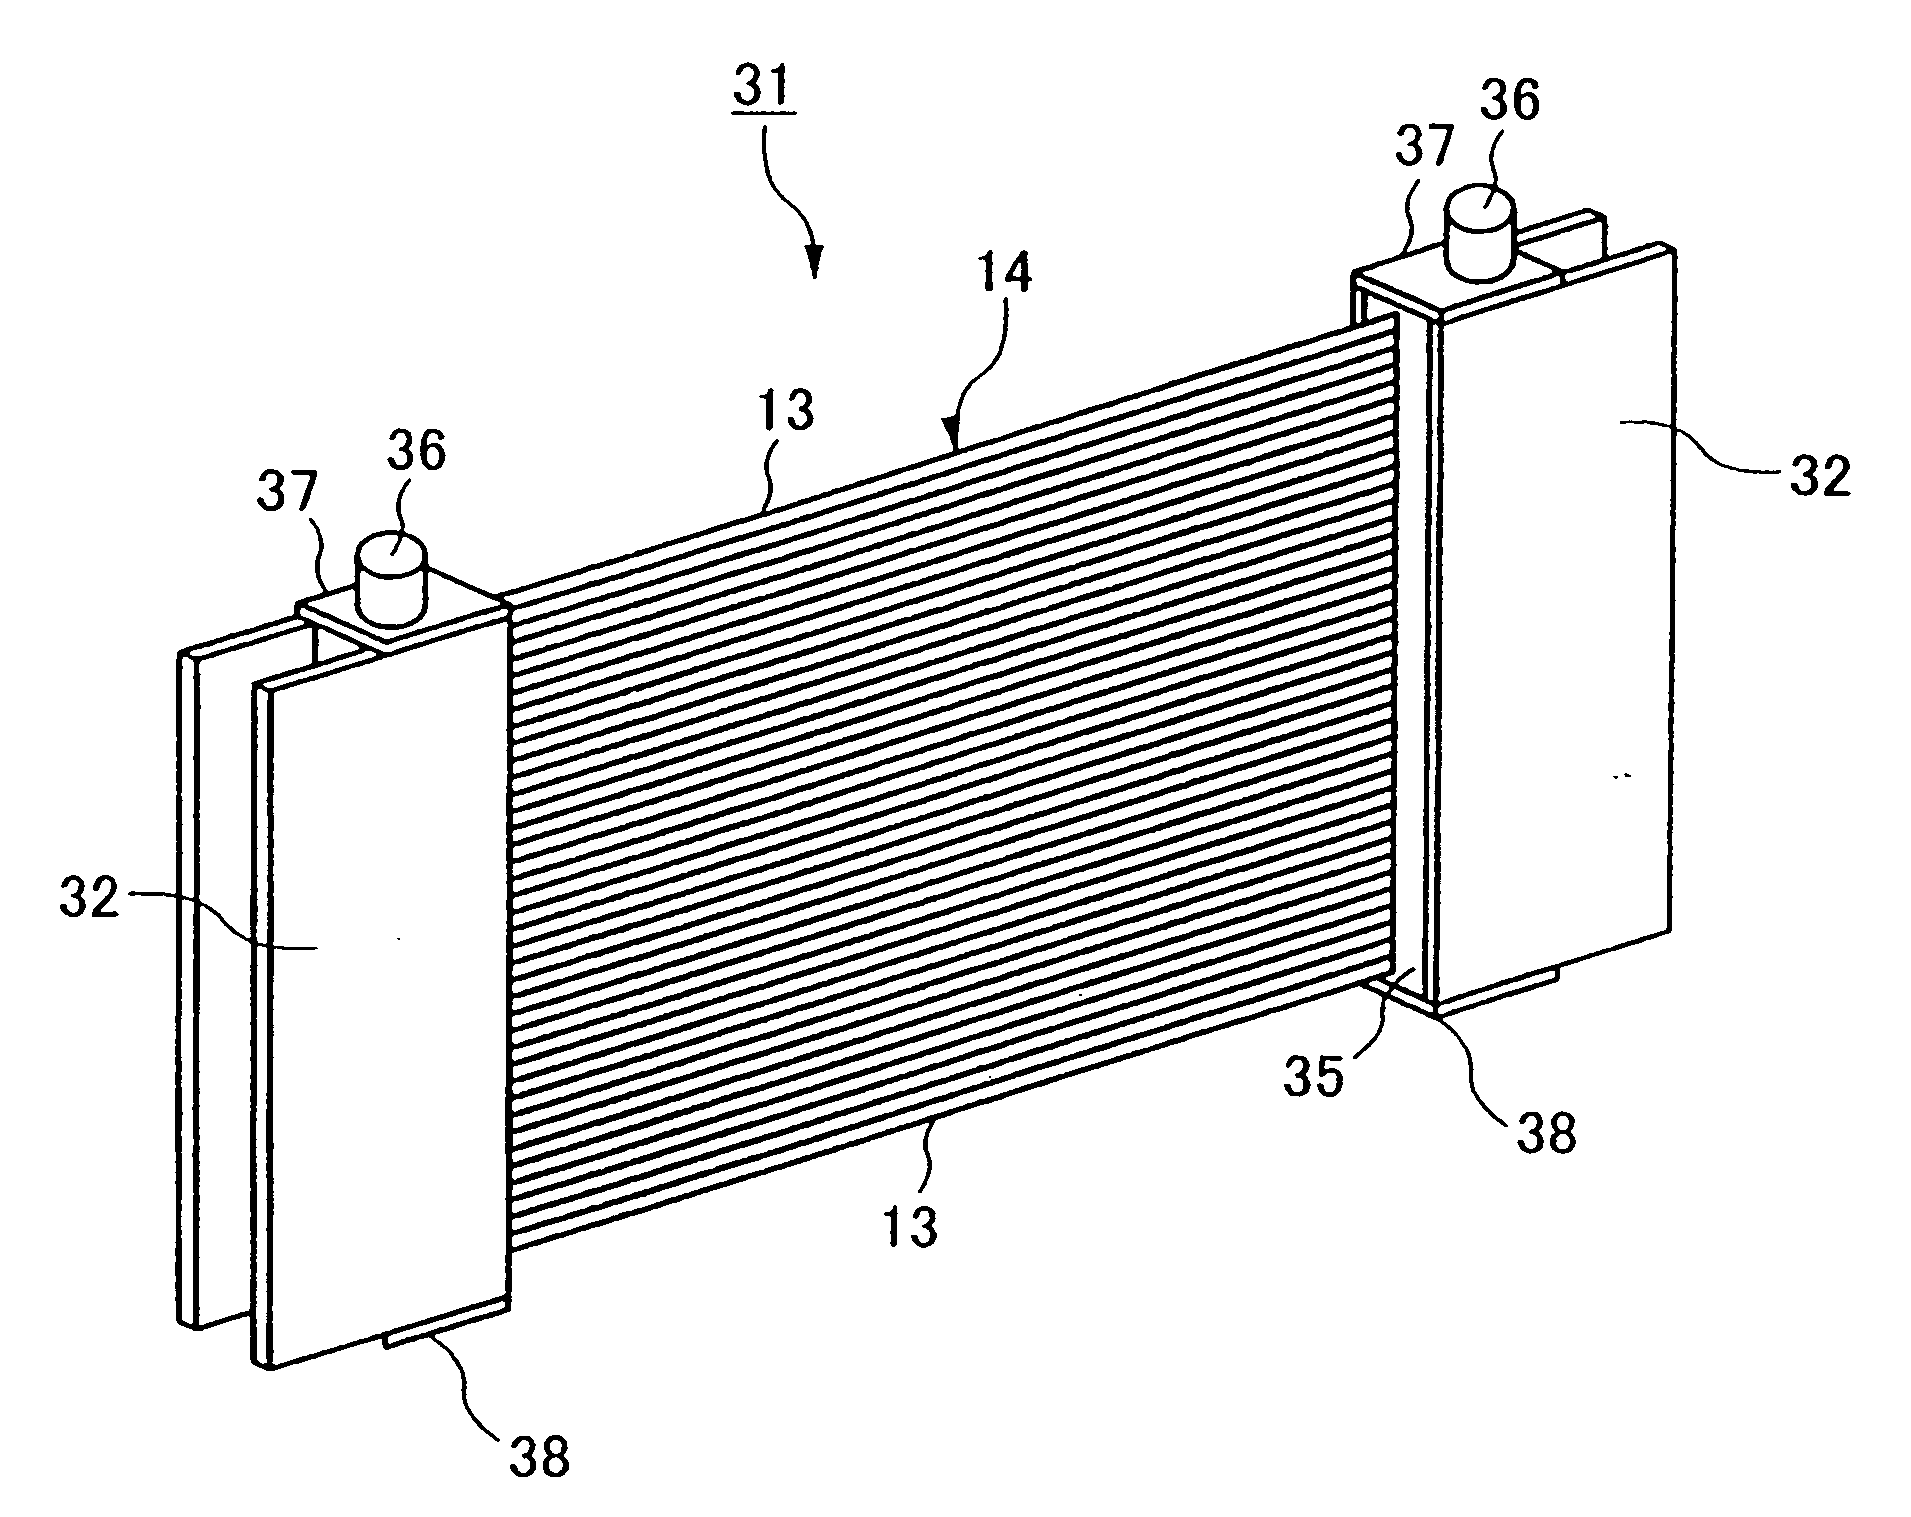 Hollow fiber membrane module, and a manufacturing method therefor, and housing for hollow fiber membrane module